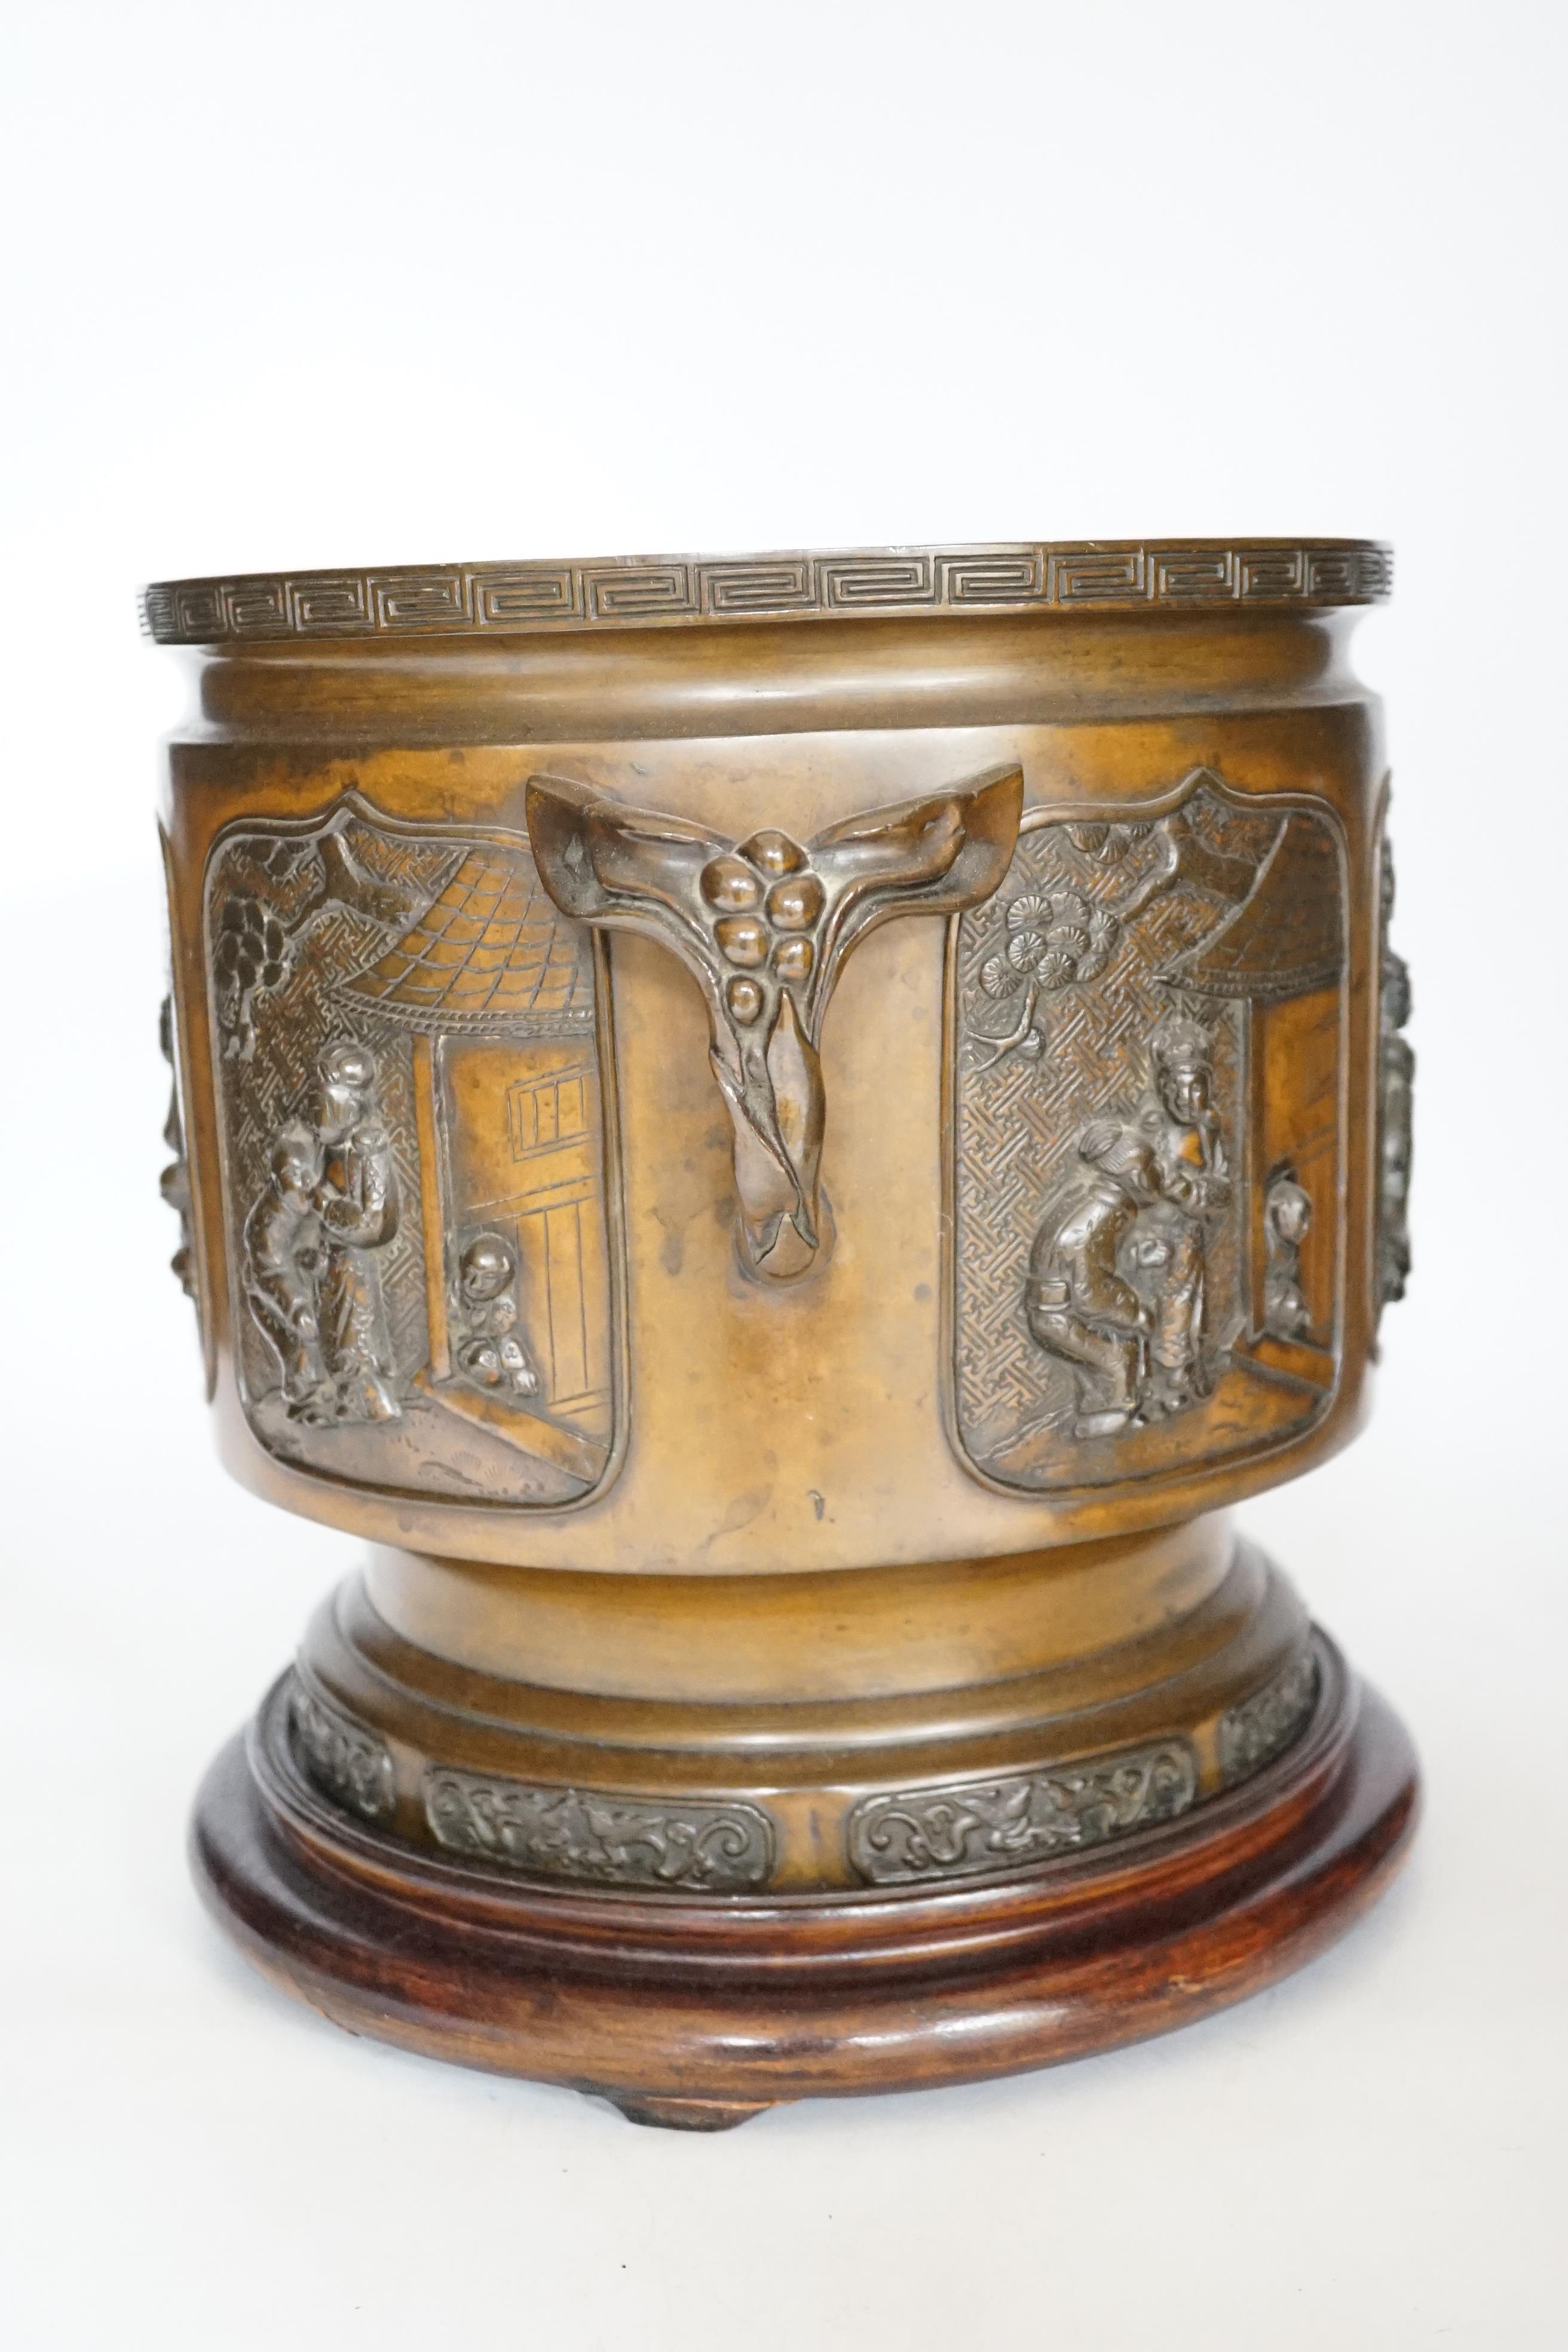 A large 19th century Japanese bronze two handled censer on stand, 28cm high - Image 4 of 4